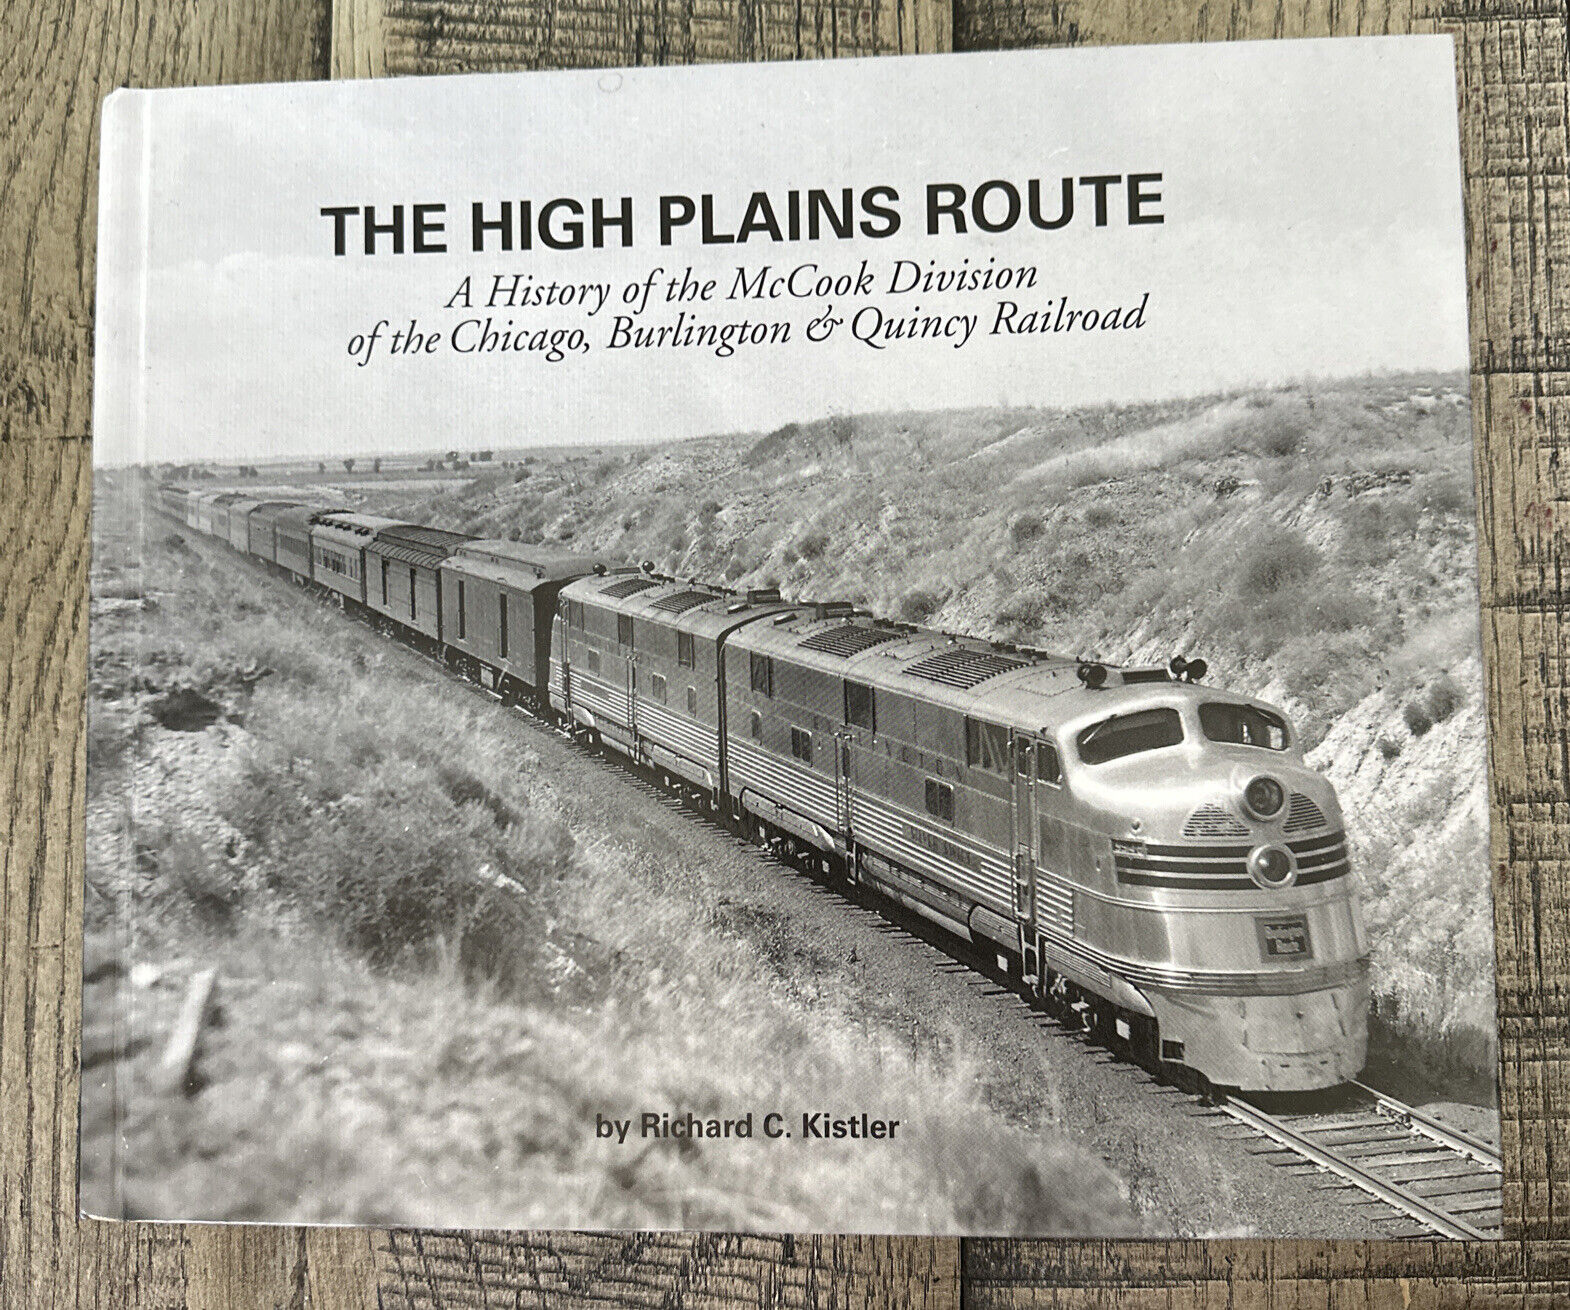 THE HIGH PLAINS ROUTE A HISTORY OF THE MCCOOK DIVISION OF…Richard C. Kistler